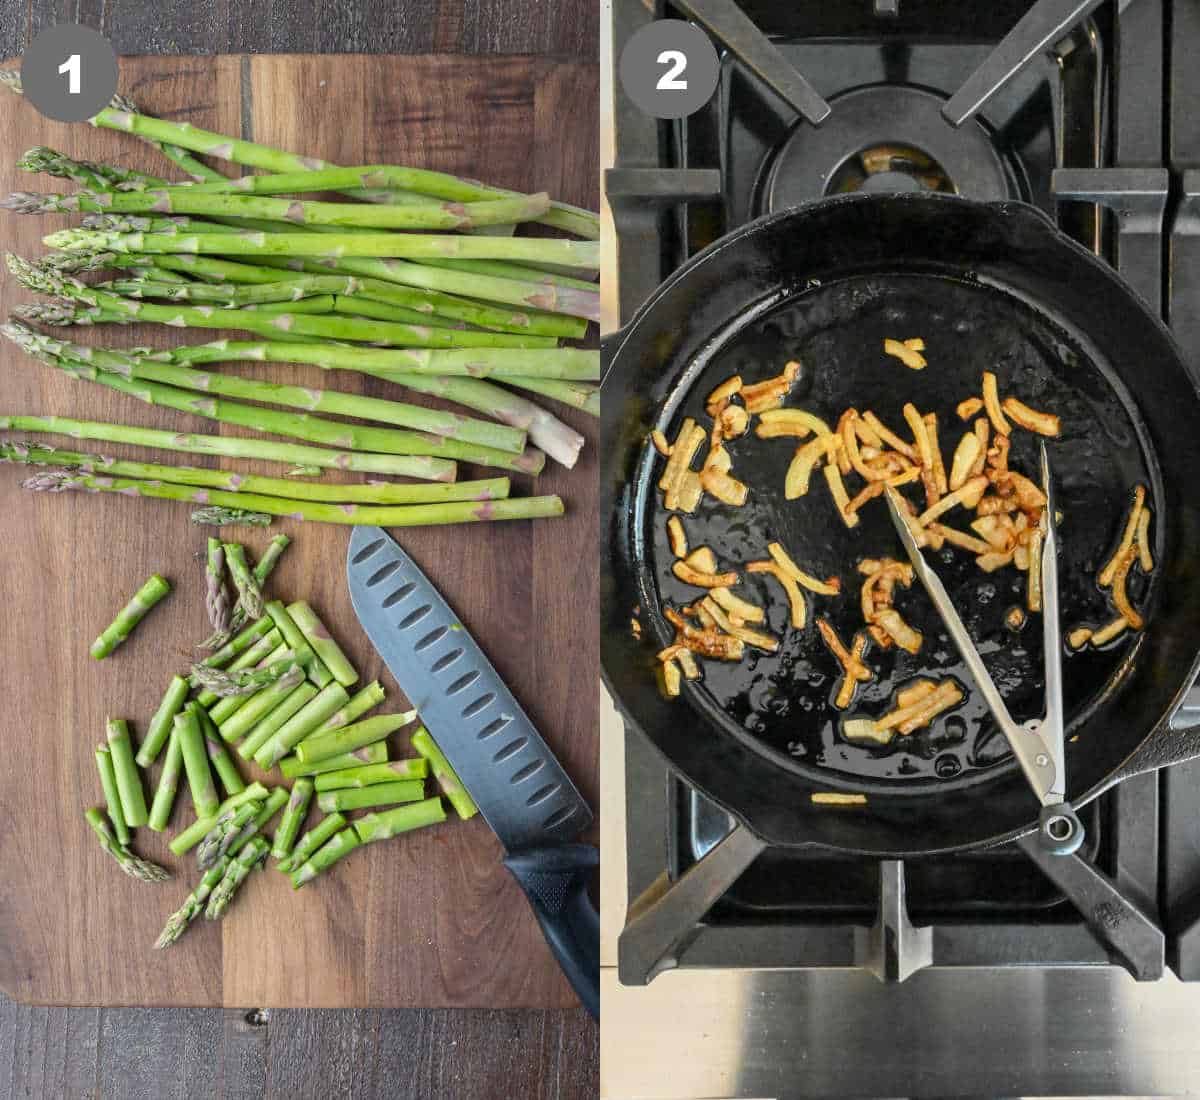 Asparagus being cut into 1 inch pieces and onions sauteed in a skillet.